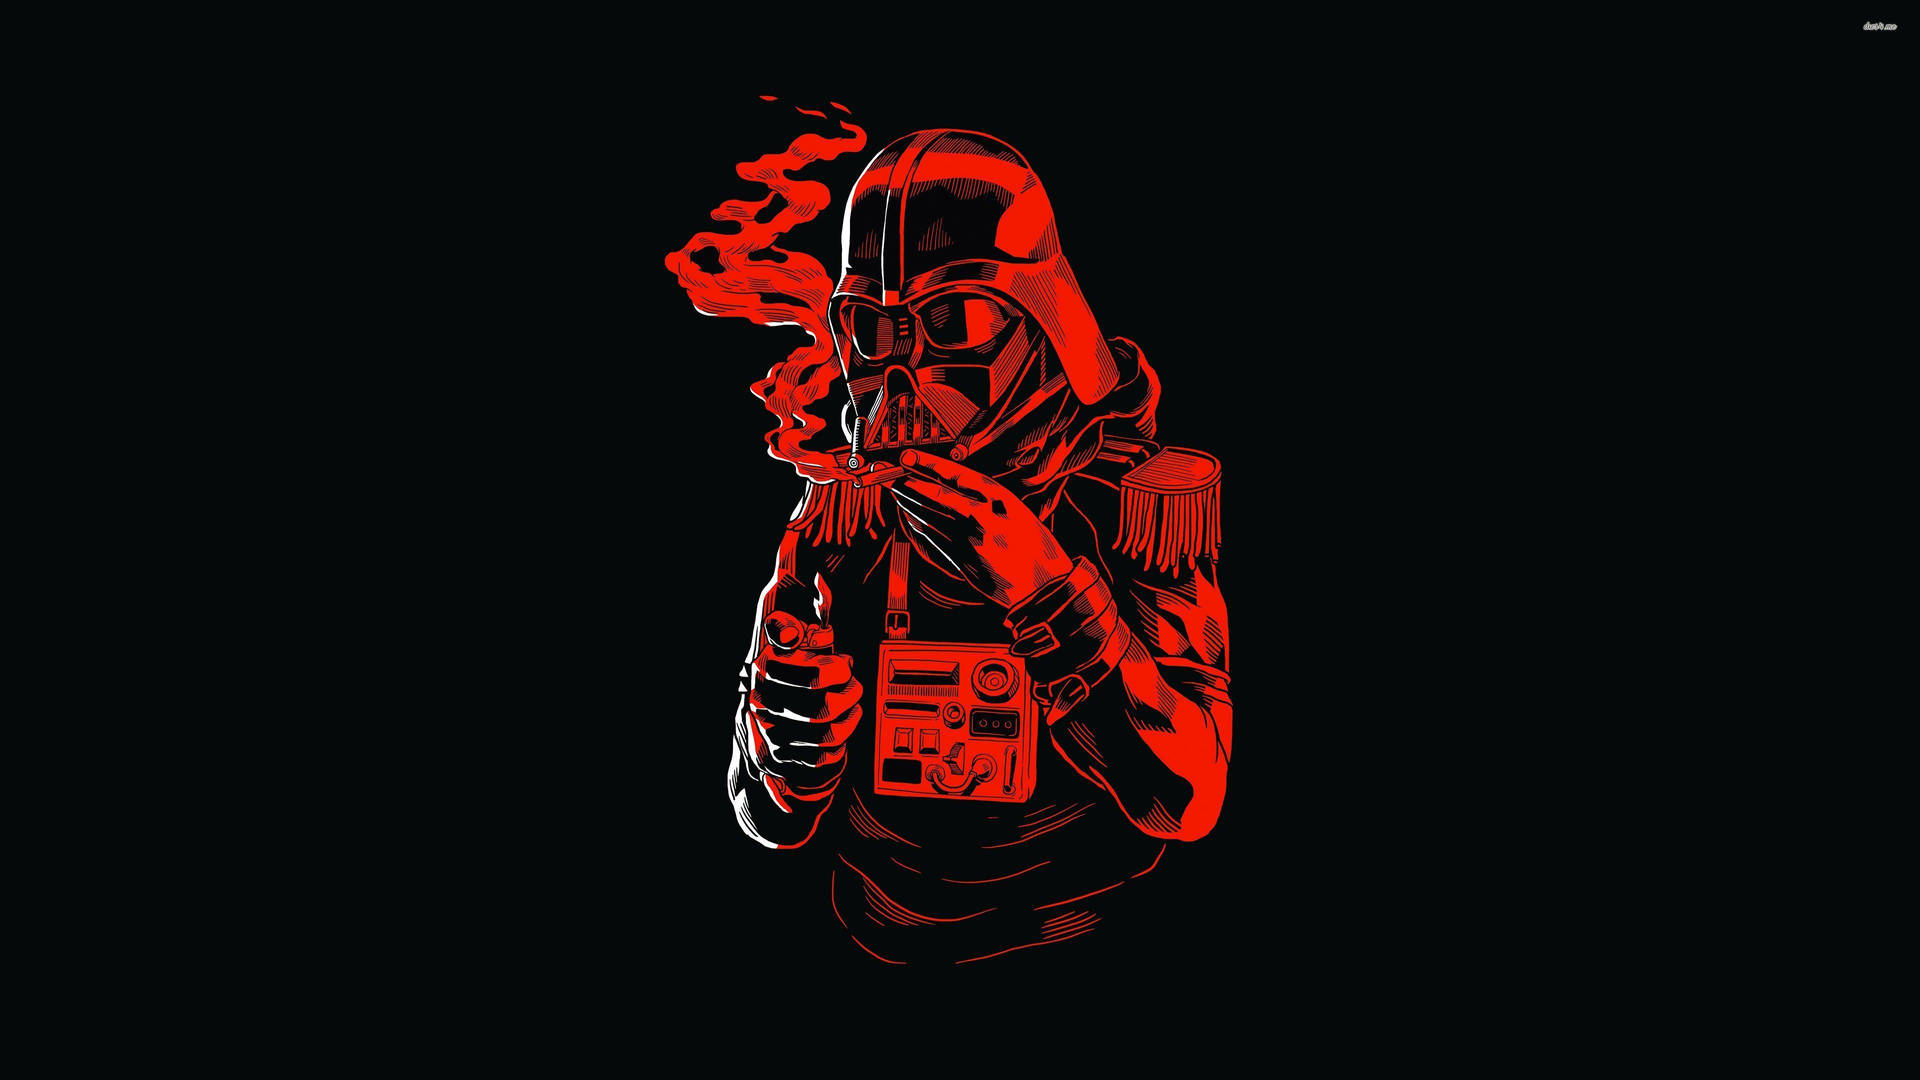 3840X2160 Darth Vader Wallpaper and Background